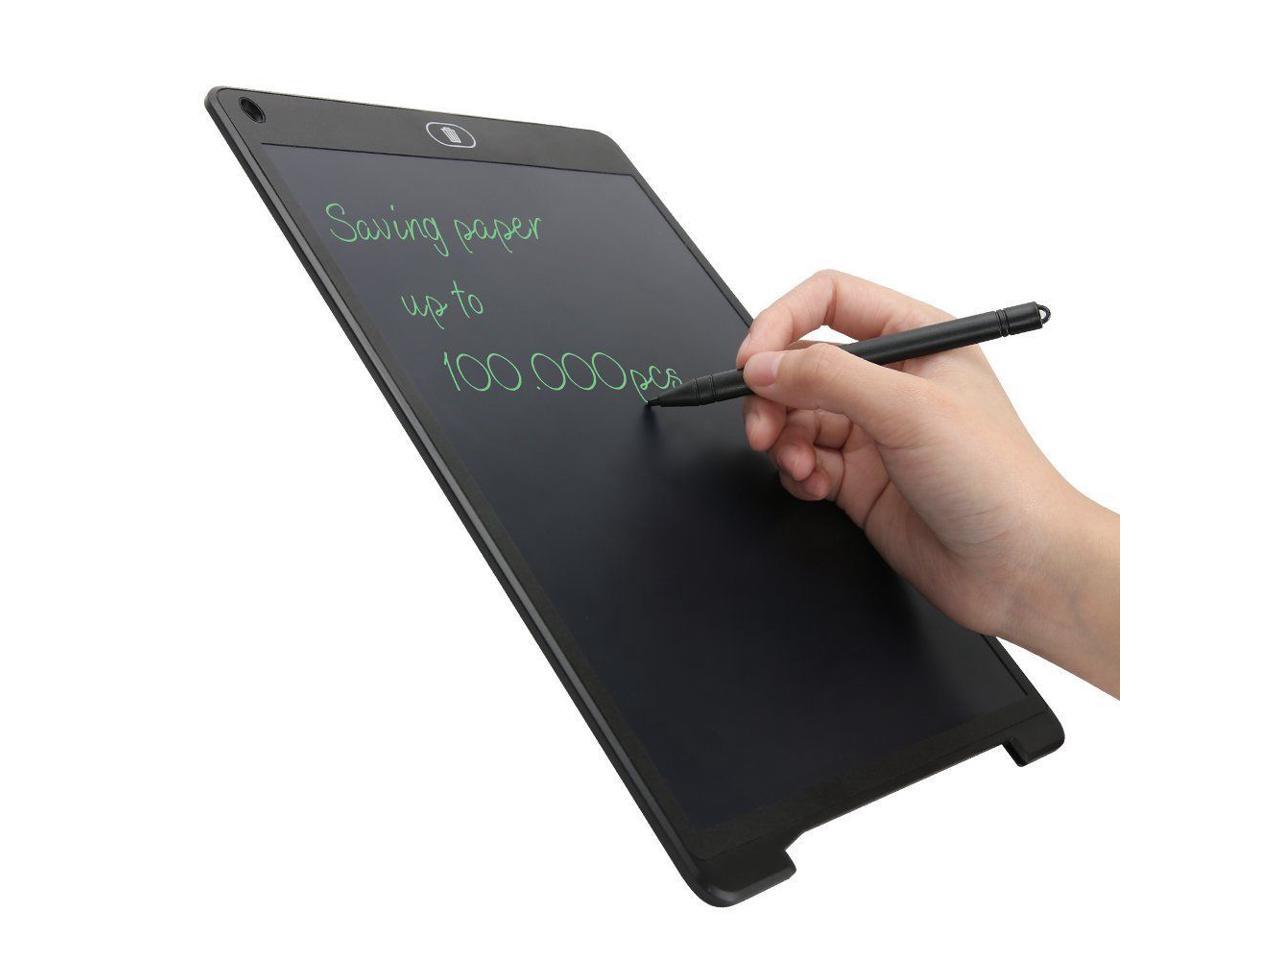 Large Colorful Screen Drawing Doodle Board with Stylus Pen Cyan Dinosaur genenic 10.5 inch Portable LCD Writing Tablet for Kids Educational and Learning Toys 